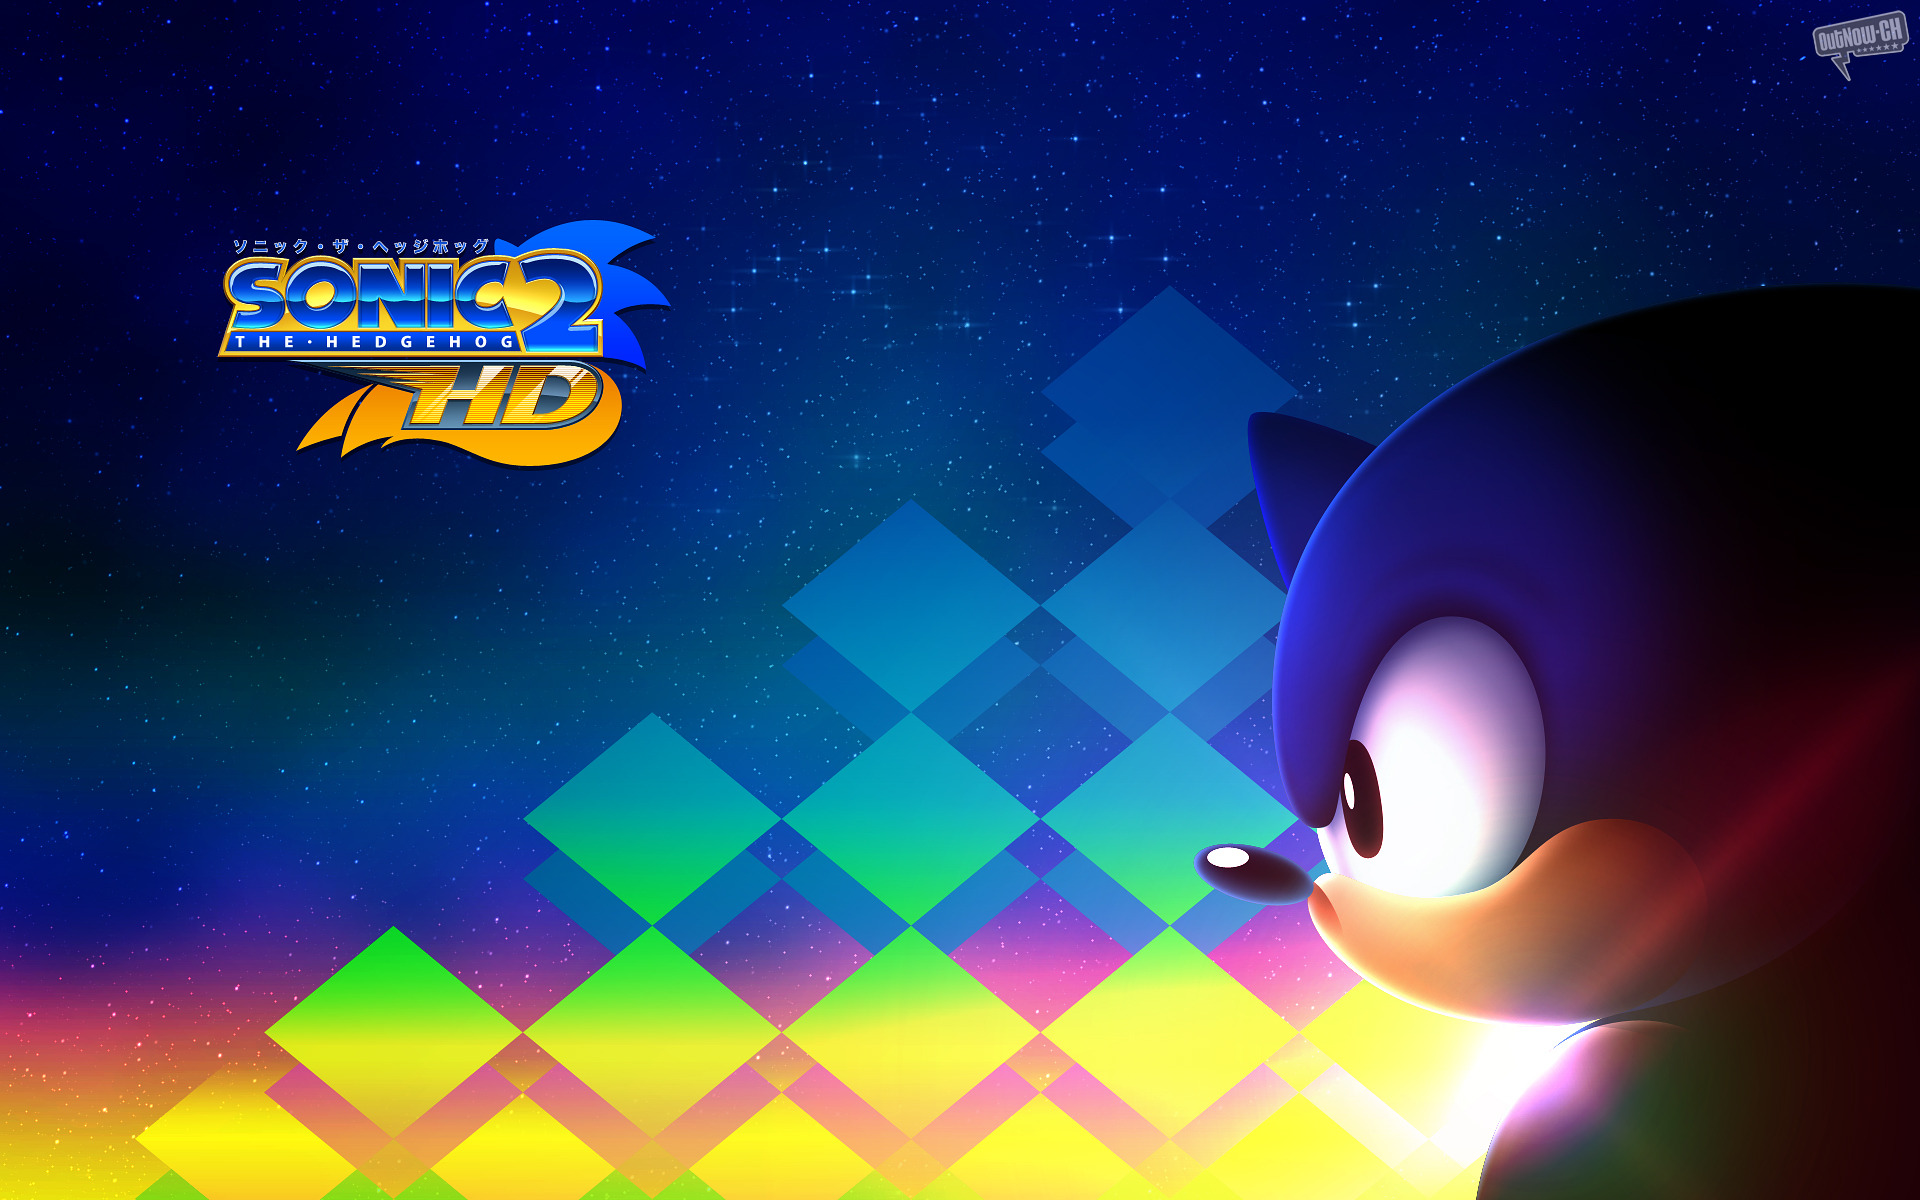 Sonic 3 Hd Pc Download